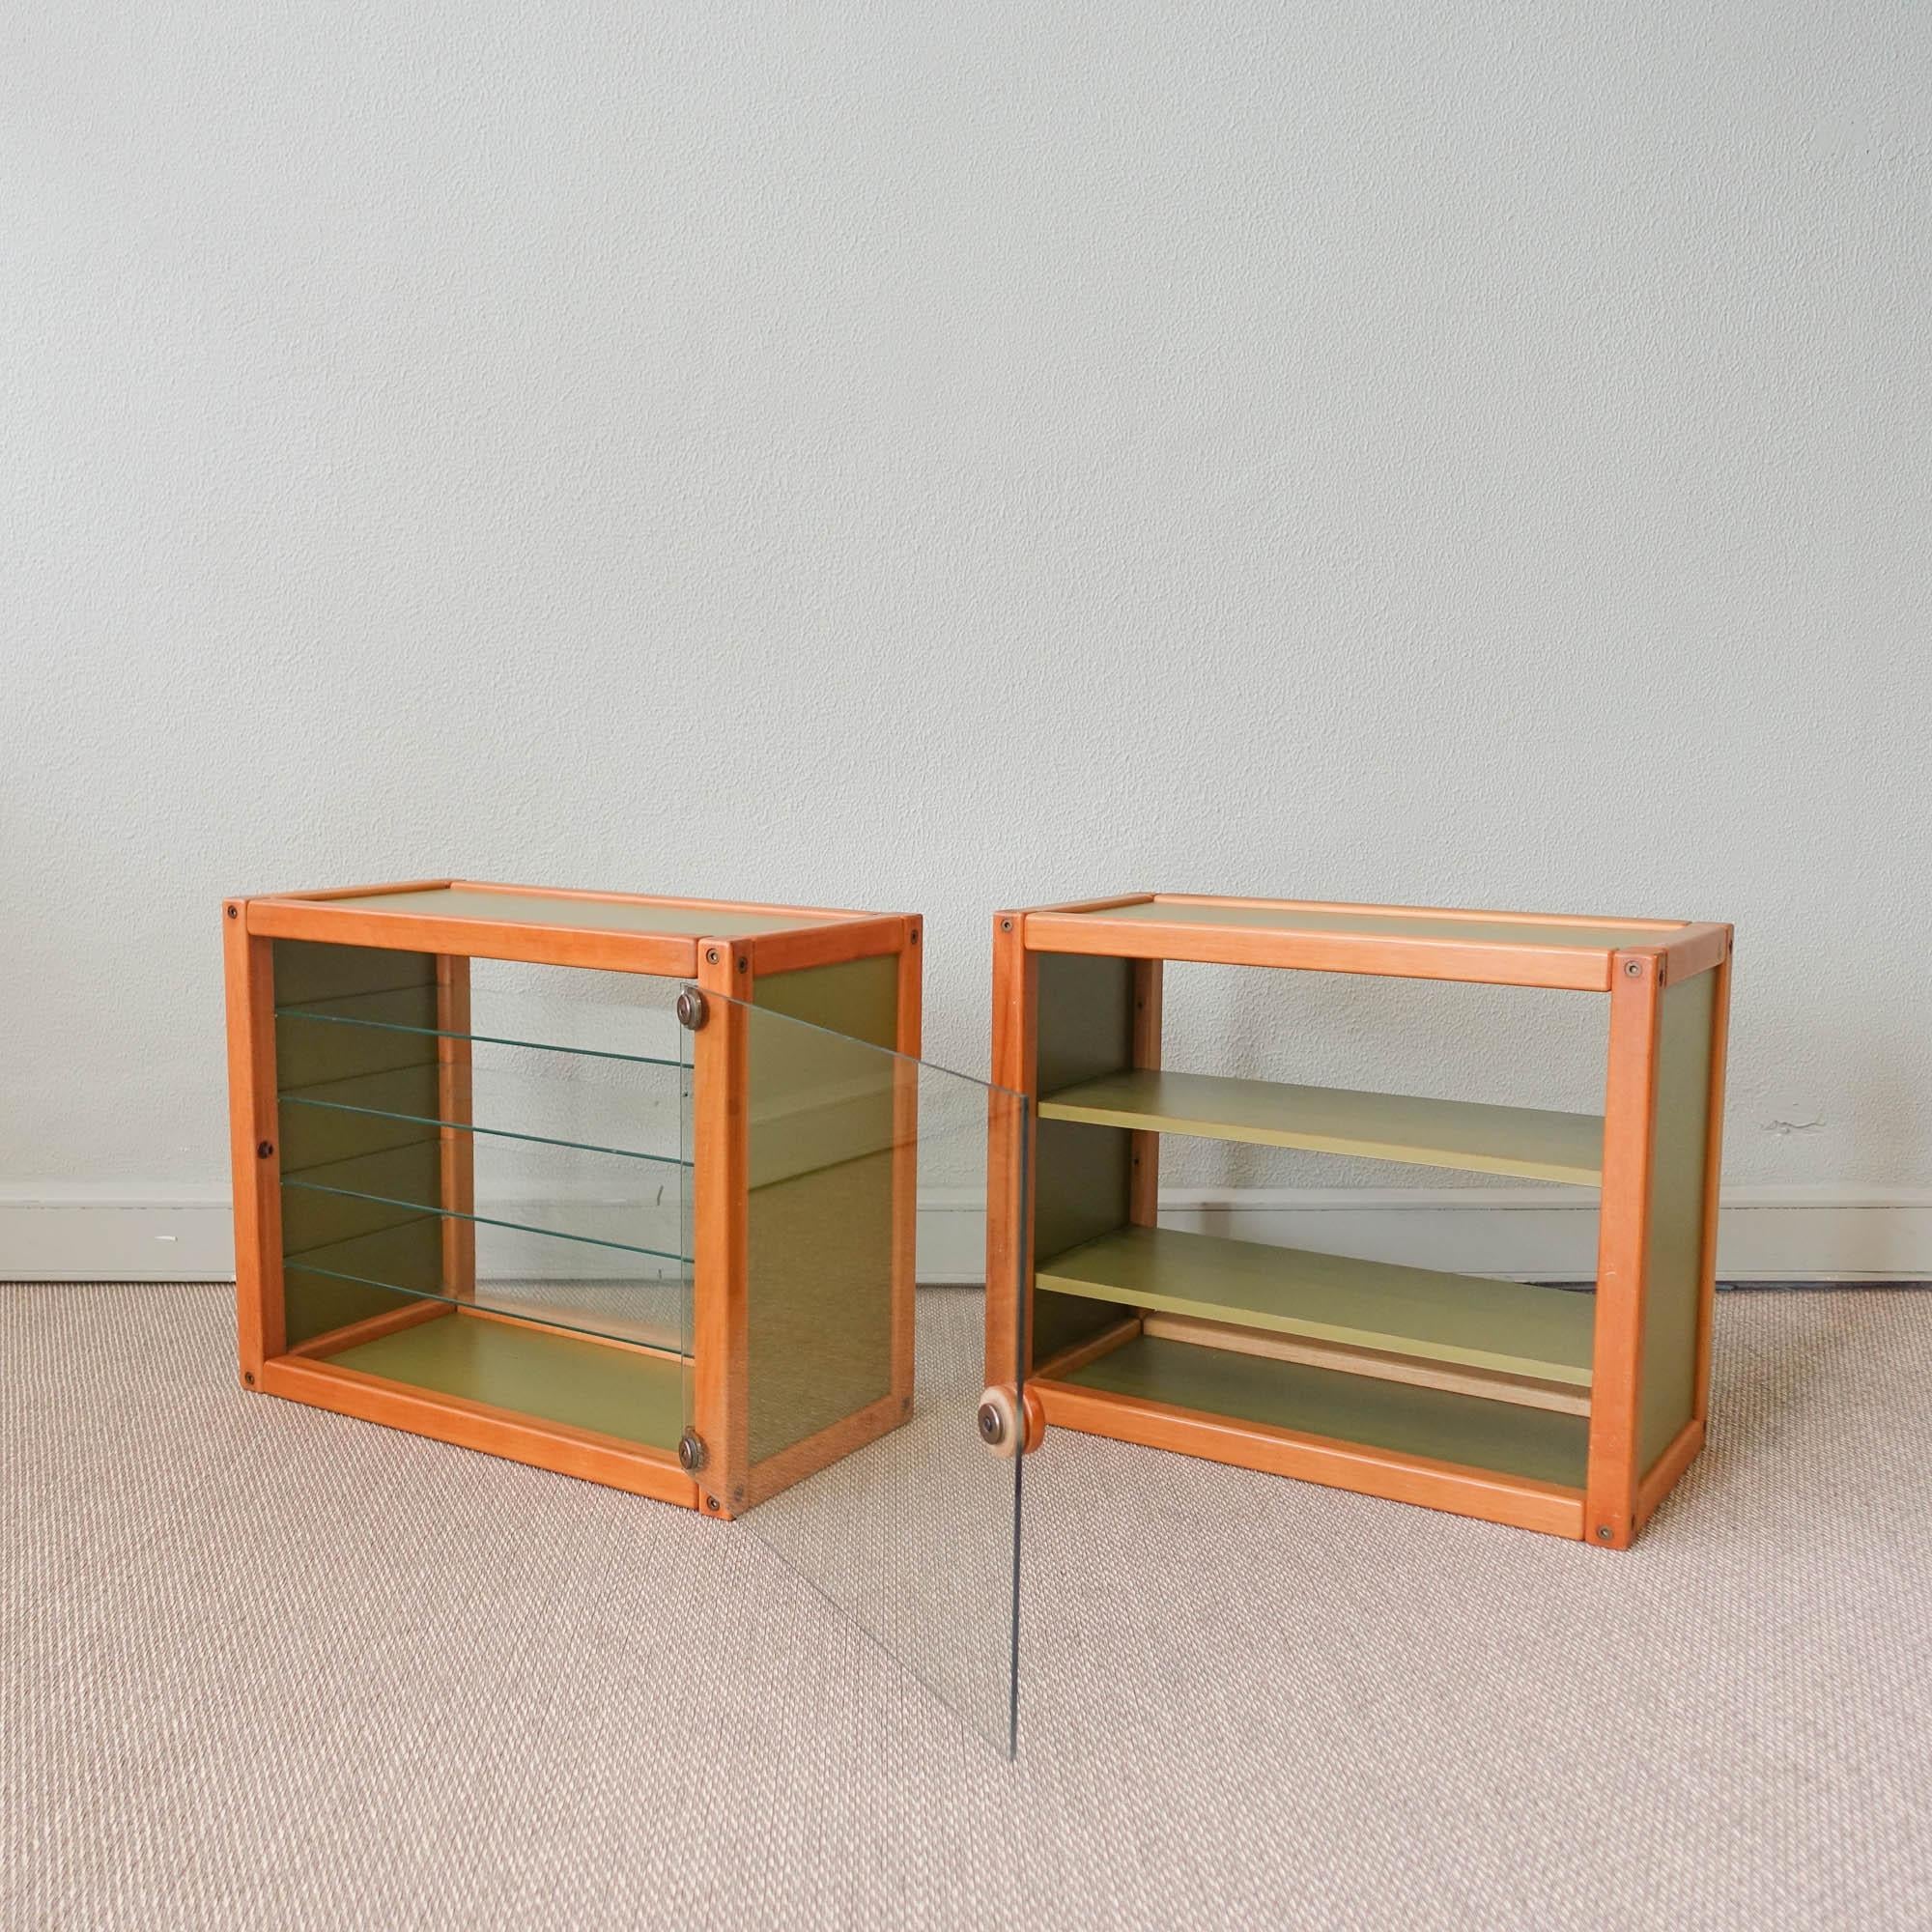 Pair of Vintage Profilsystem Collection Glass Storage Units by Elmar Flötotto For Sale 4